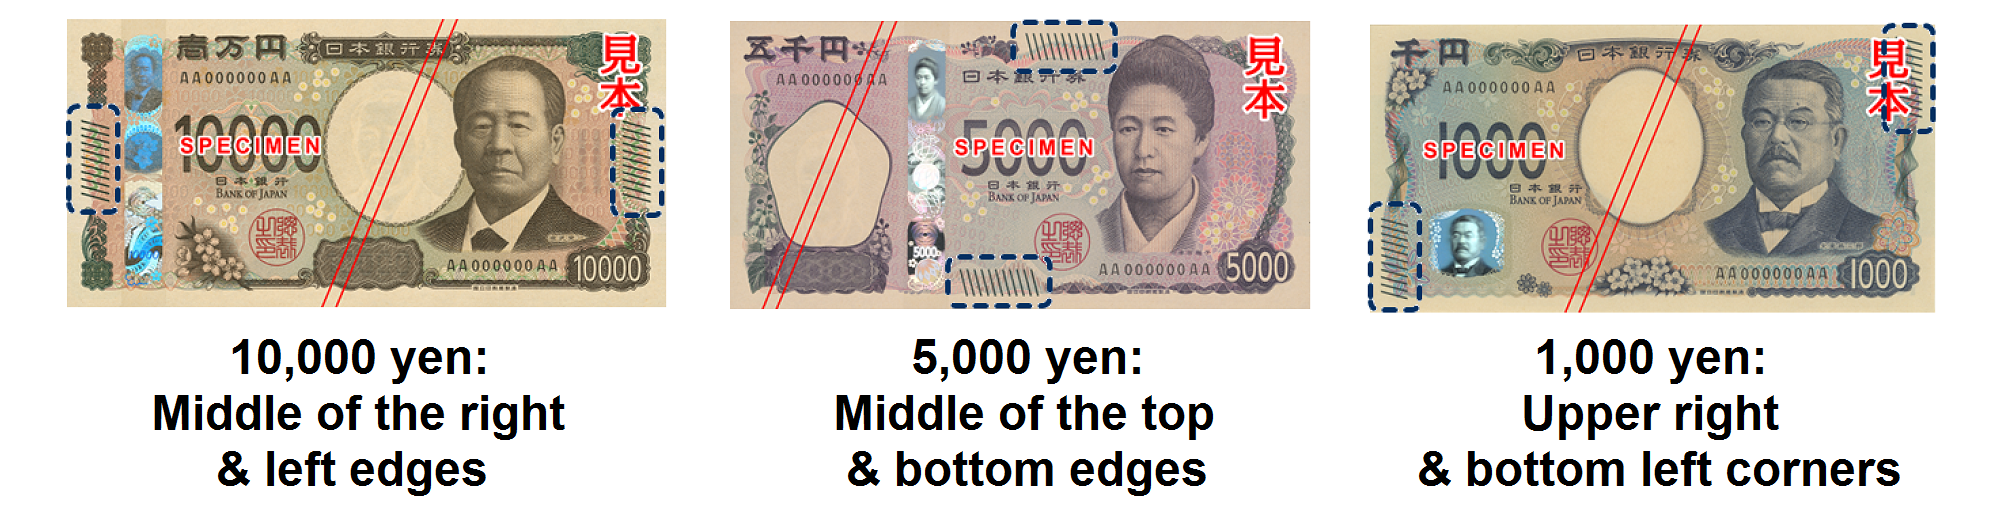 Images of the front of each denomination shown to compare the position of the tactile marks. On the 10,000 yen note, these marks are in the middle of the right and left edges. On the 5,000 yen note, they are in the middle of the top and bottom edges. On the 1,000 yen note, they are at the upper right and bottom left corners.